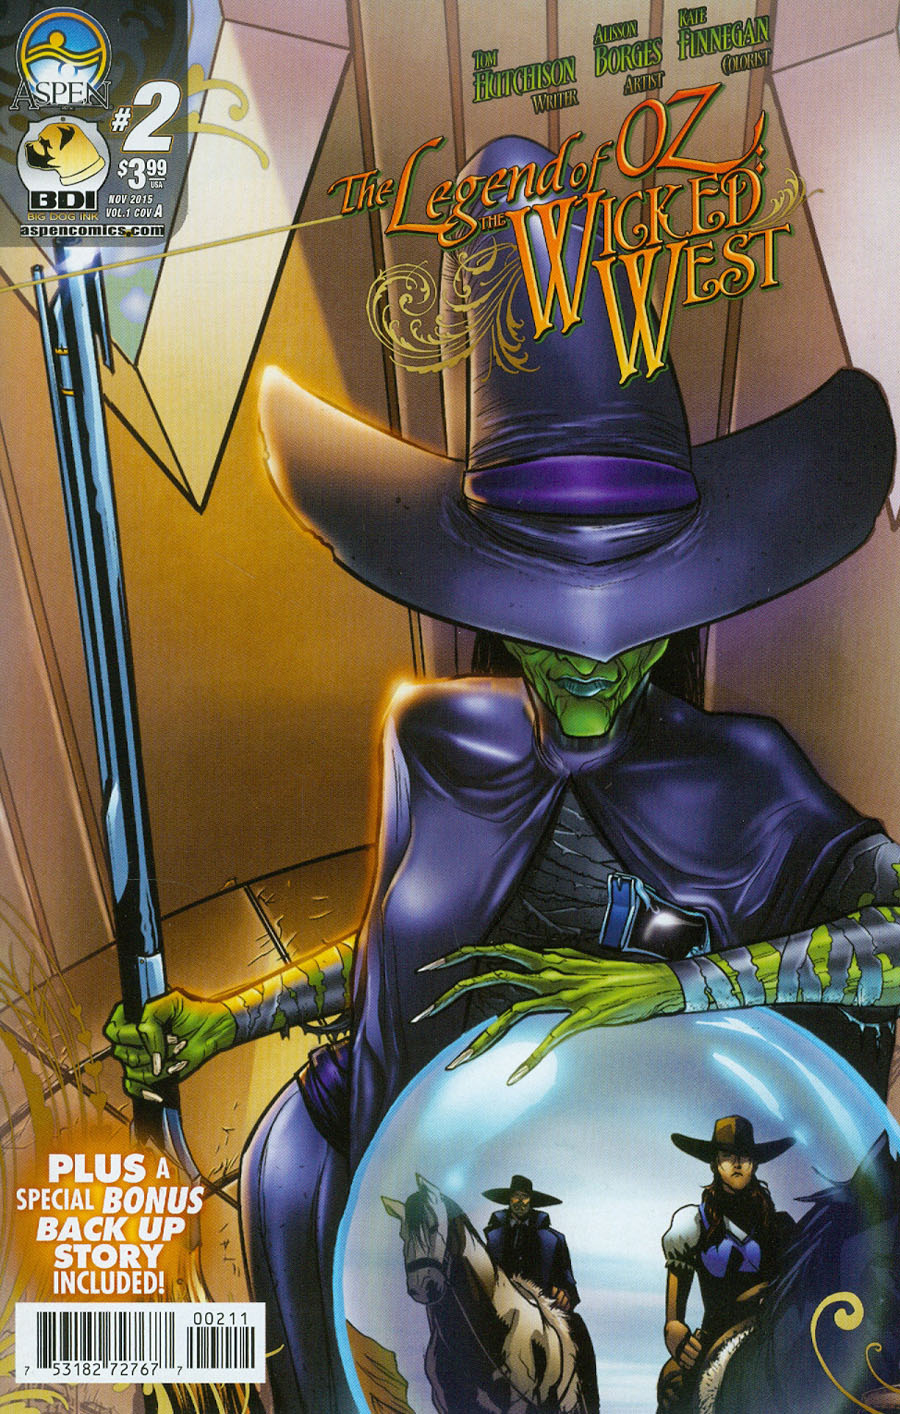 Legend Of Oz The Wicked West Vol 3 #2 Cover A Regular Allison Borges Cover